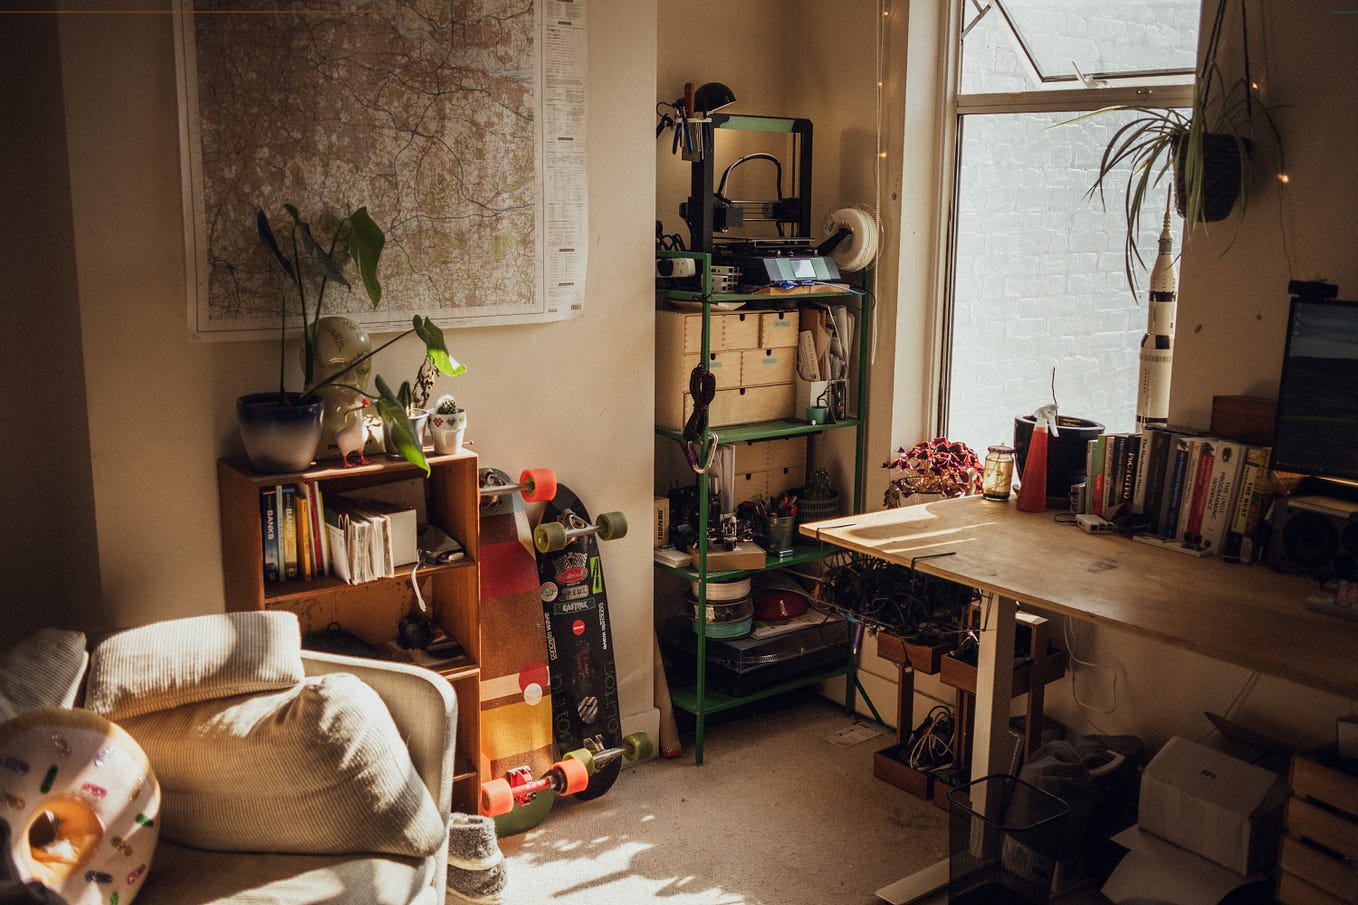 This is how clutter negatively impacts your life. Here are 3 ways to declutter: